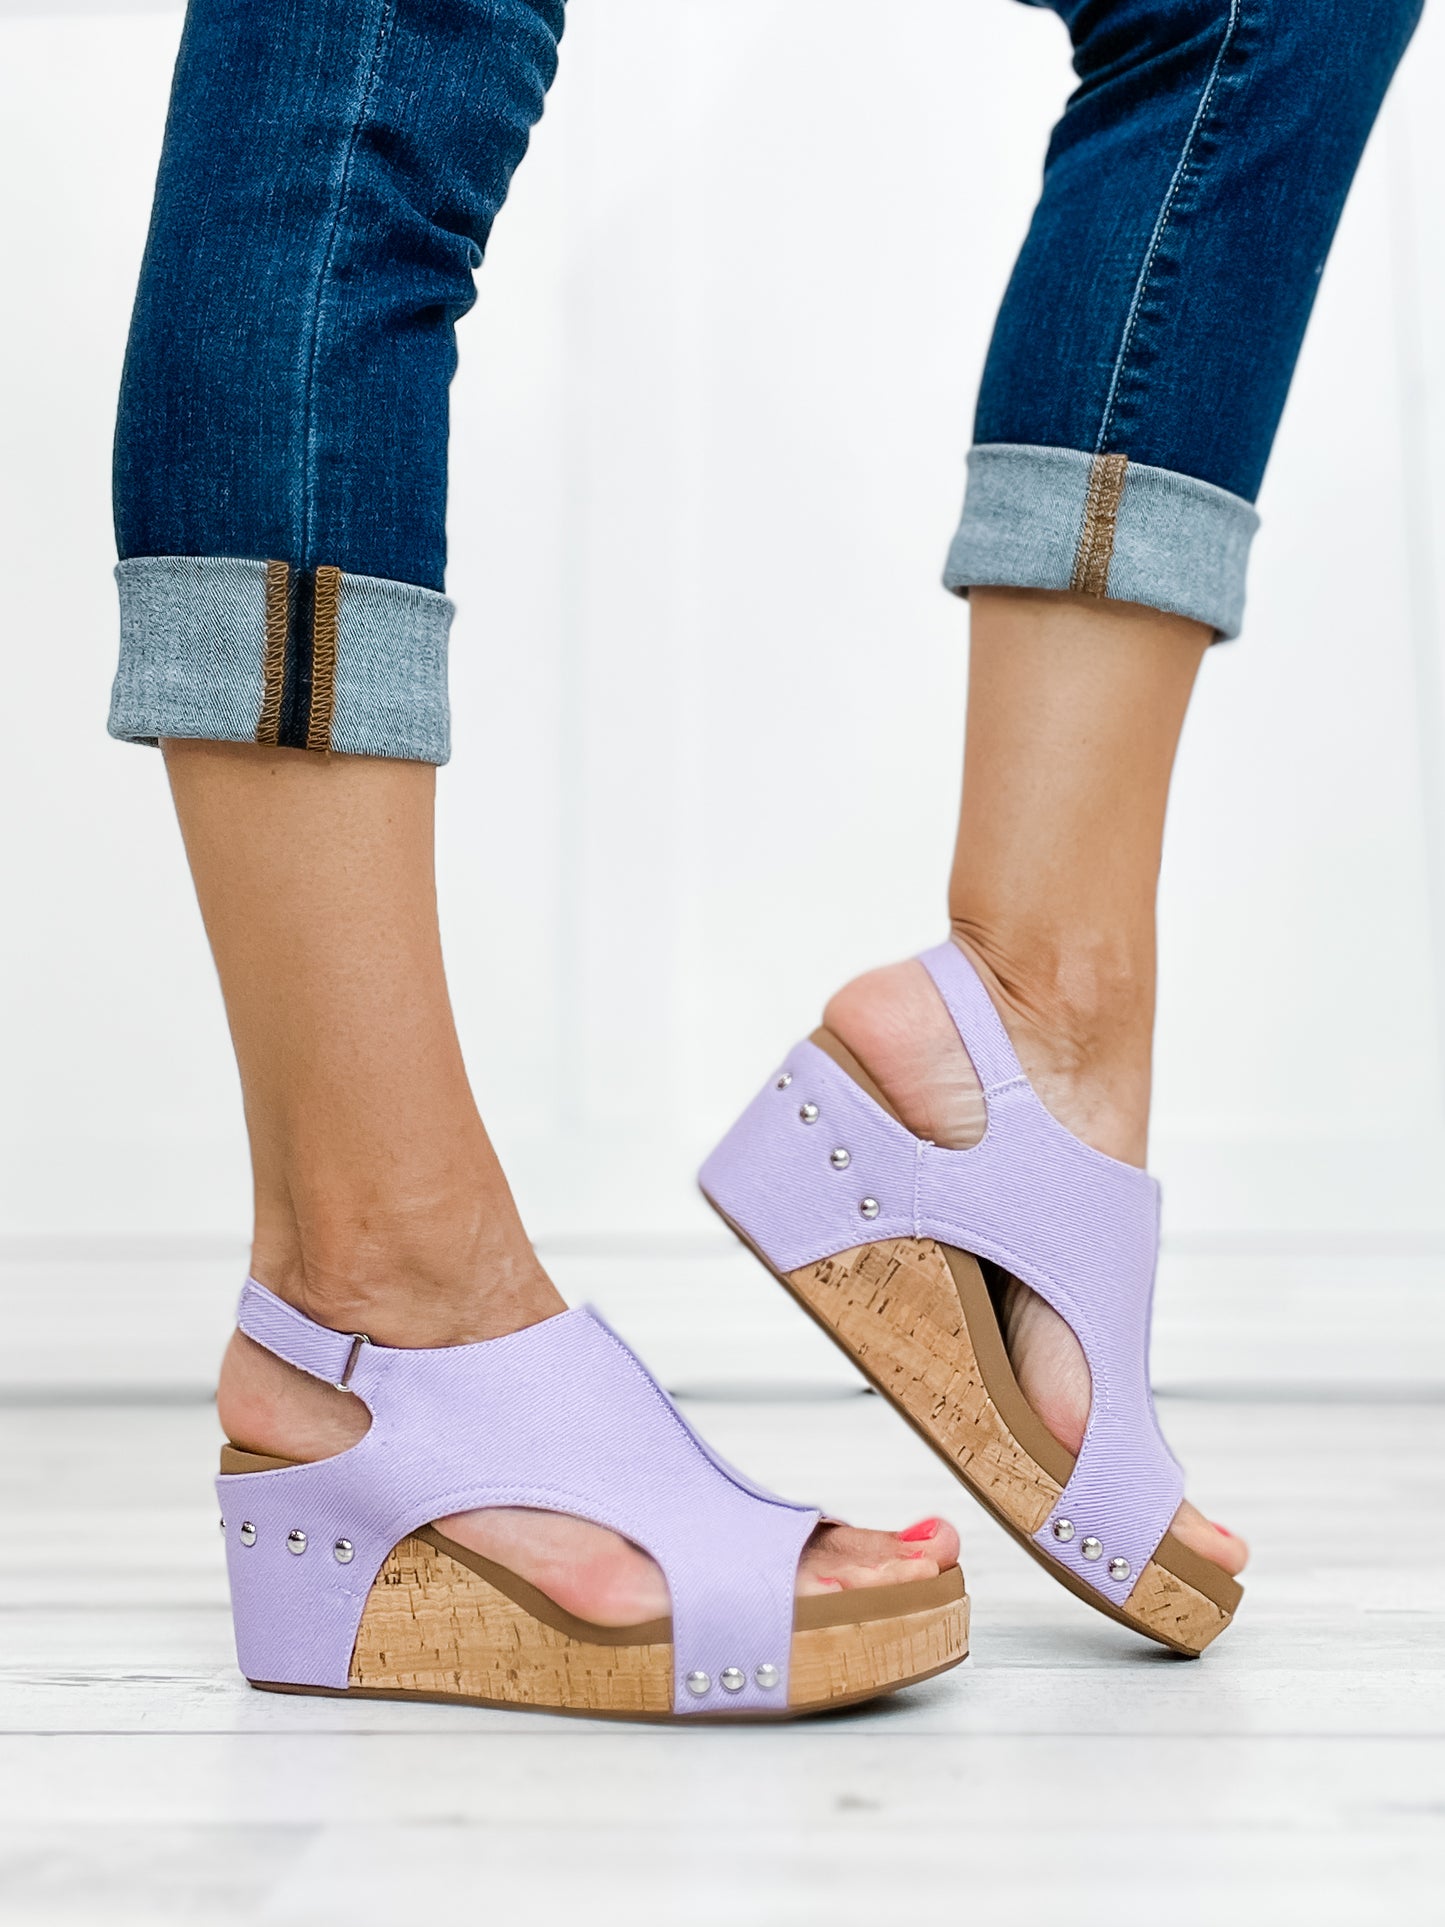 *LIMITED EDITION* Corky's Carley Lavender Canvas Wedge Shoe